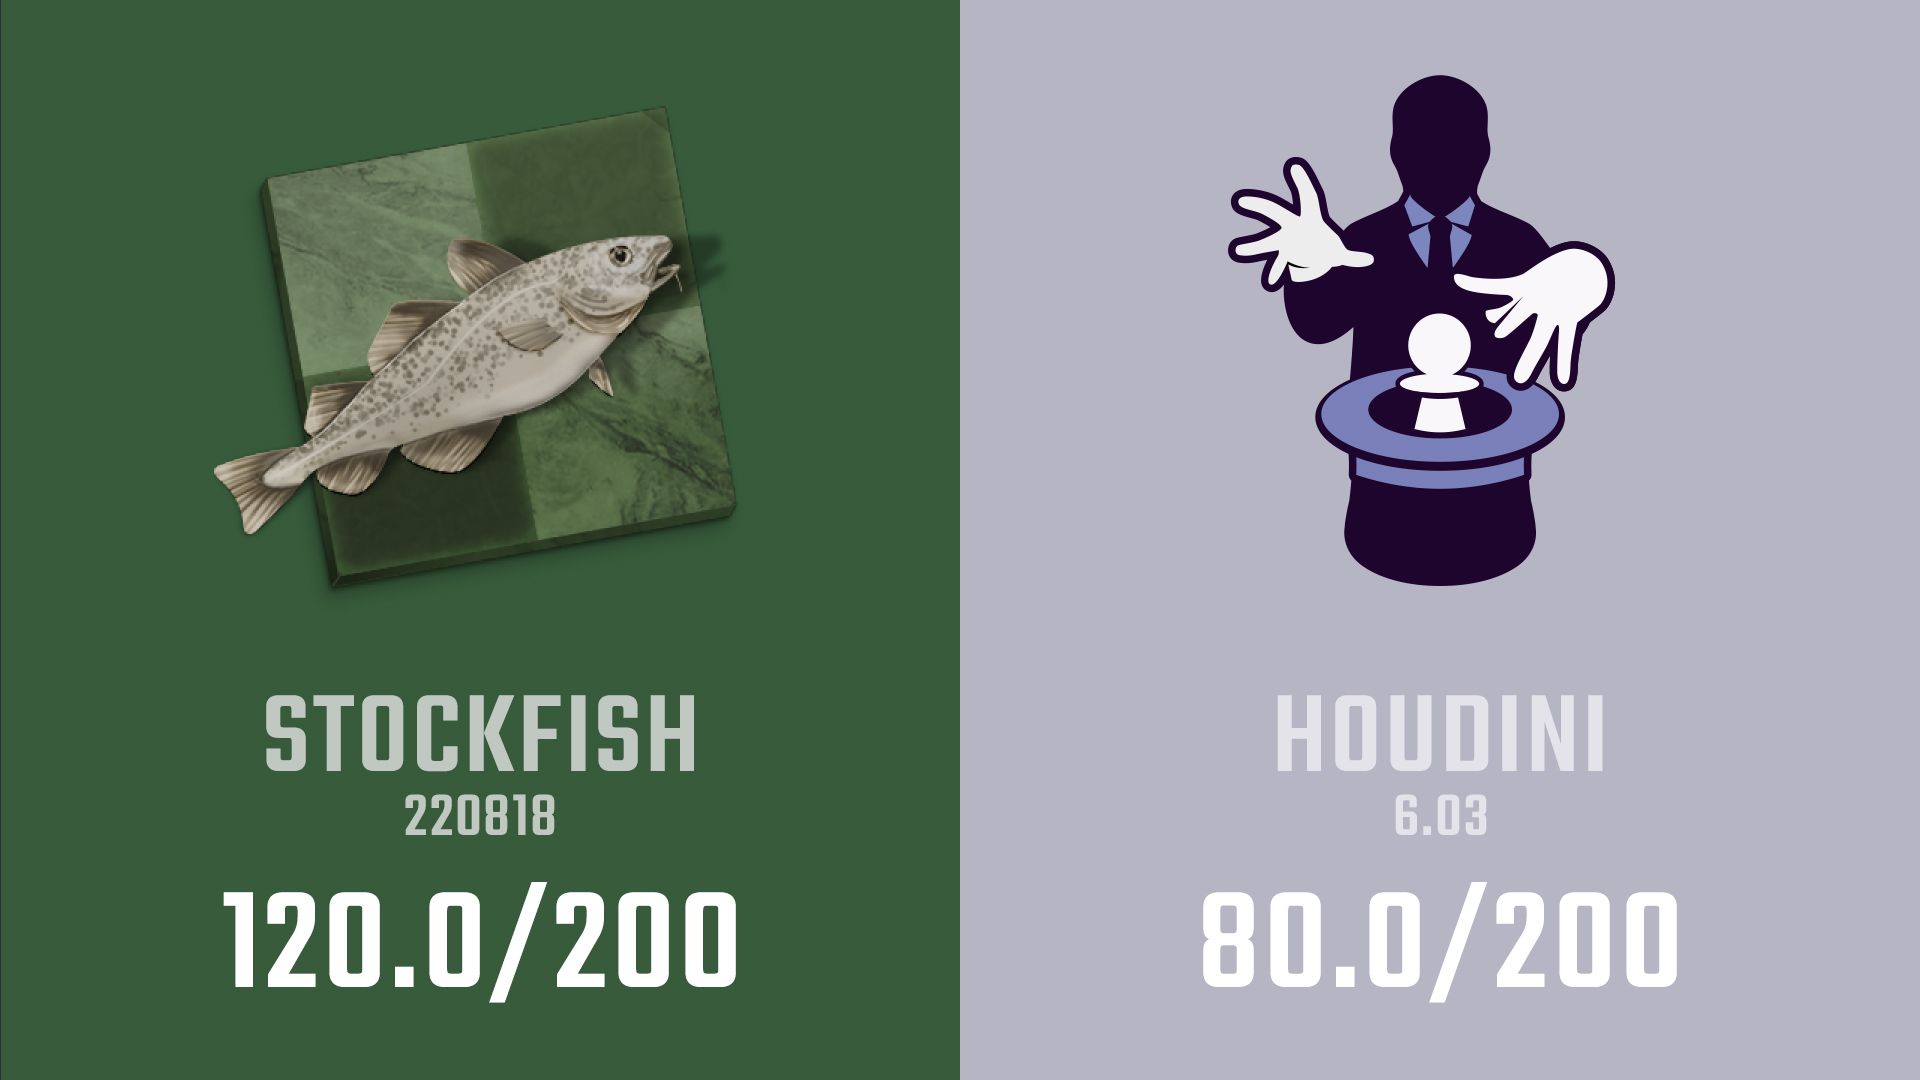 International Chess Federation on X: Stockfish 190203 won the Top #Chess # Engine #Championship 2019. #TCEC Season 14 was held Nov 2018 to Feb 2019.  In the Superfinal #Stockfish narrowly won against the